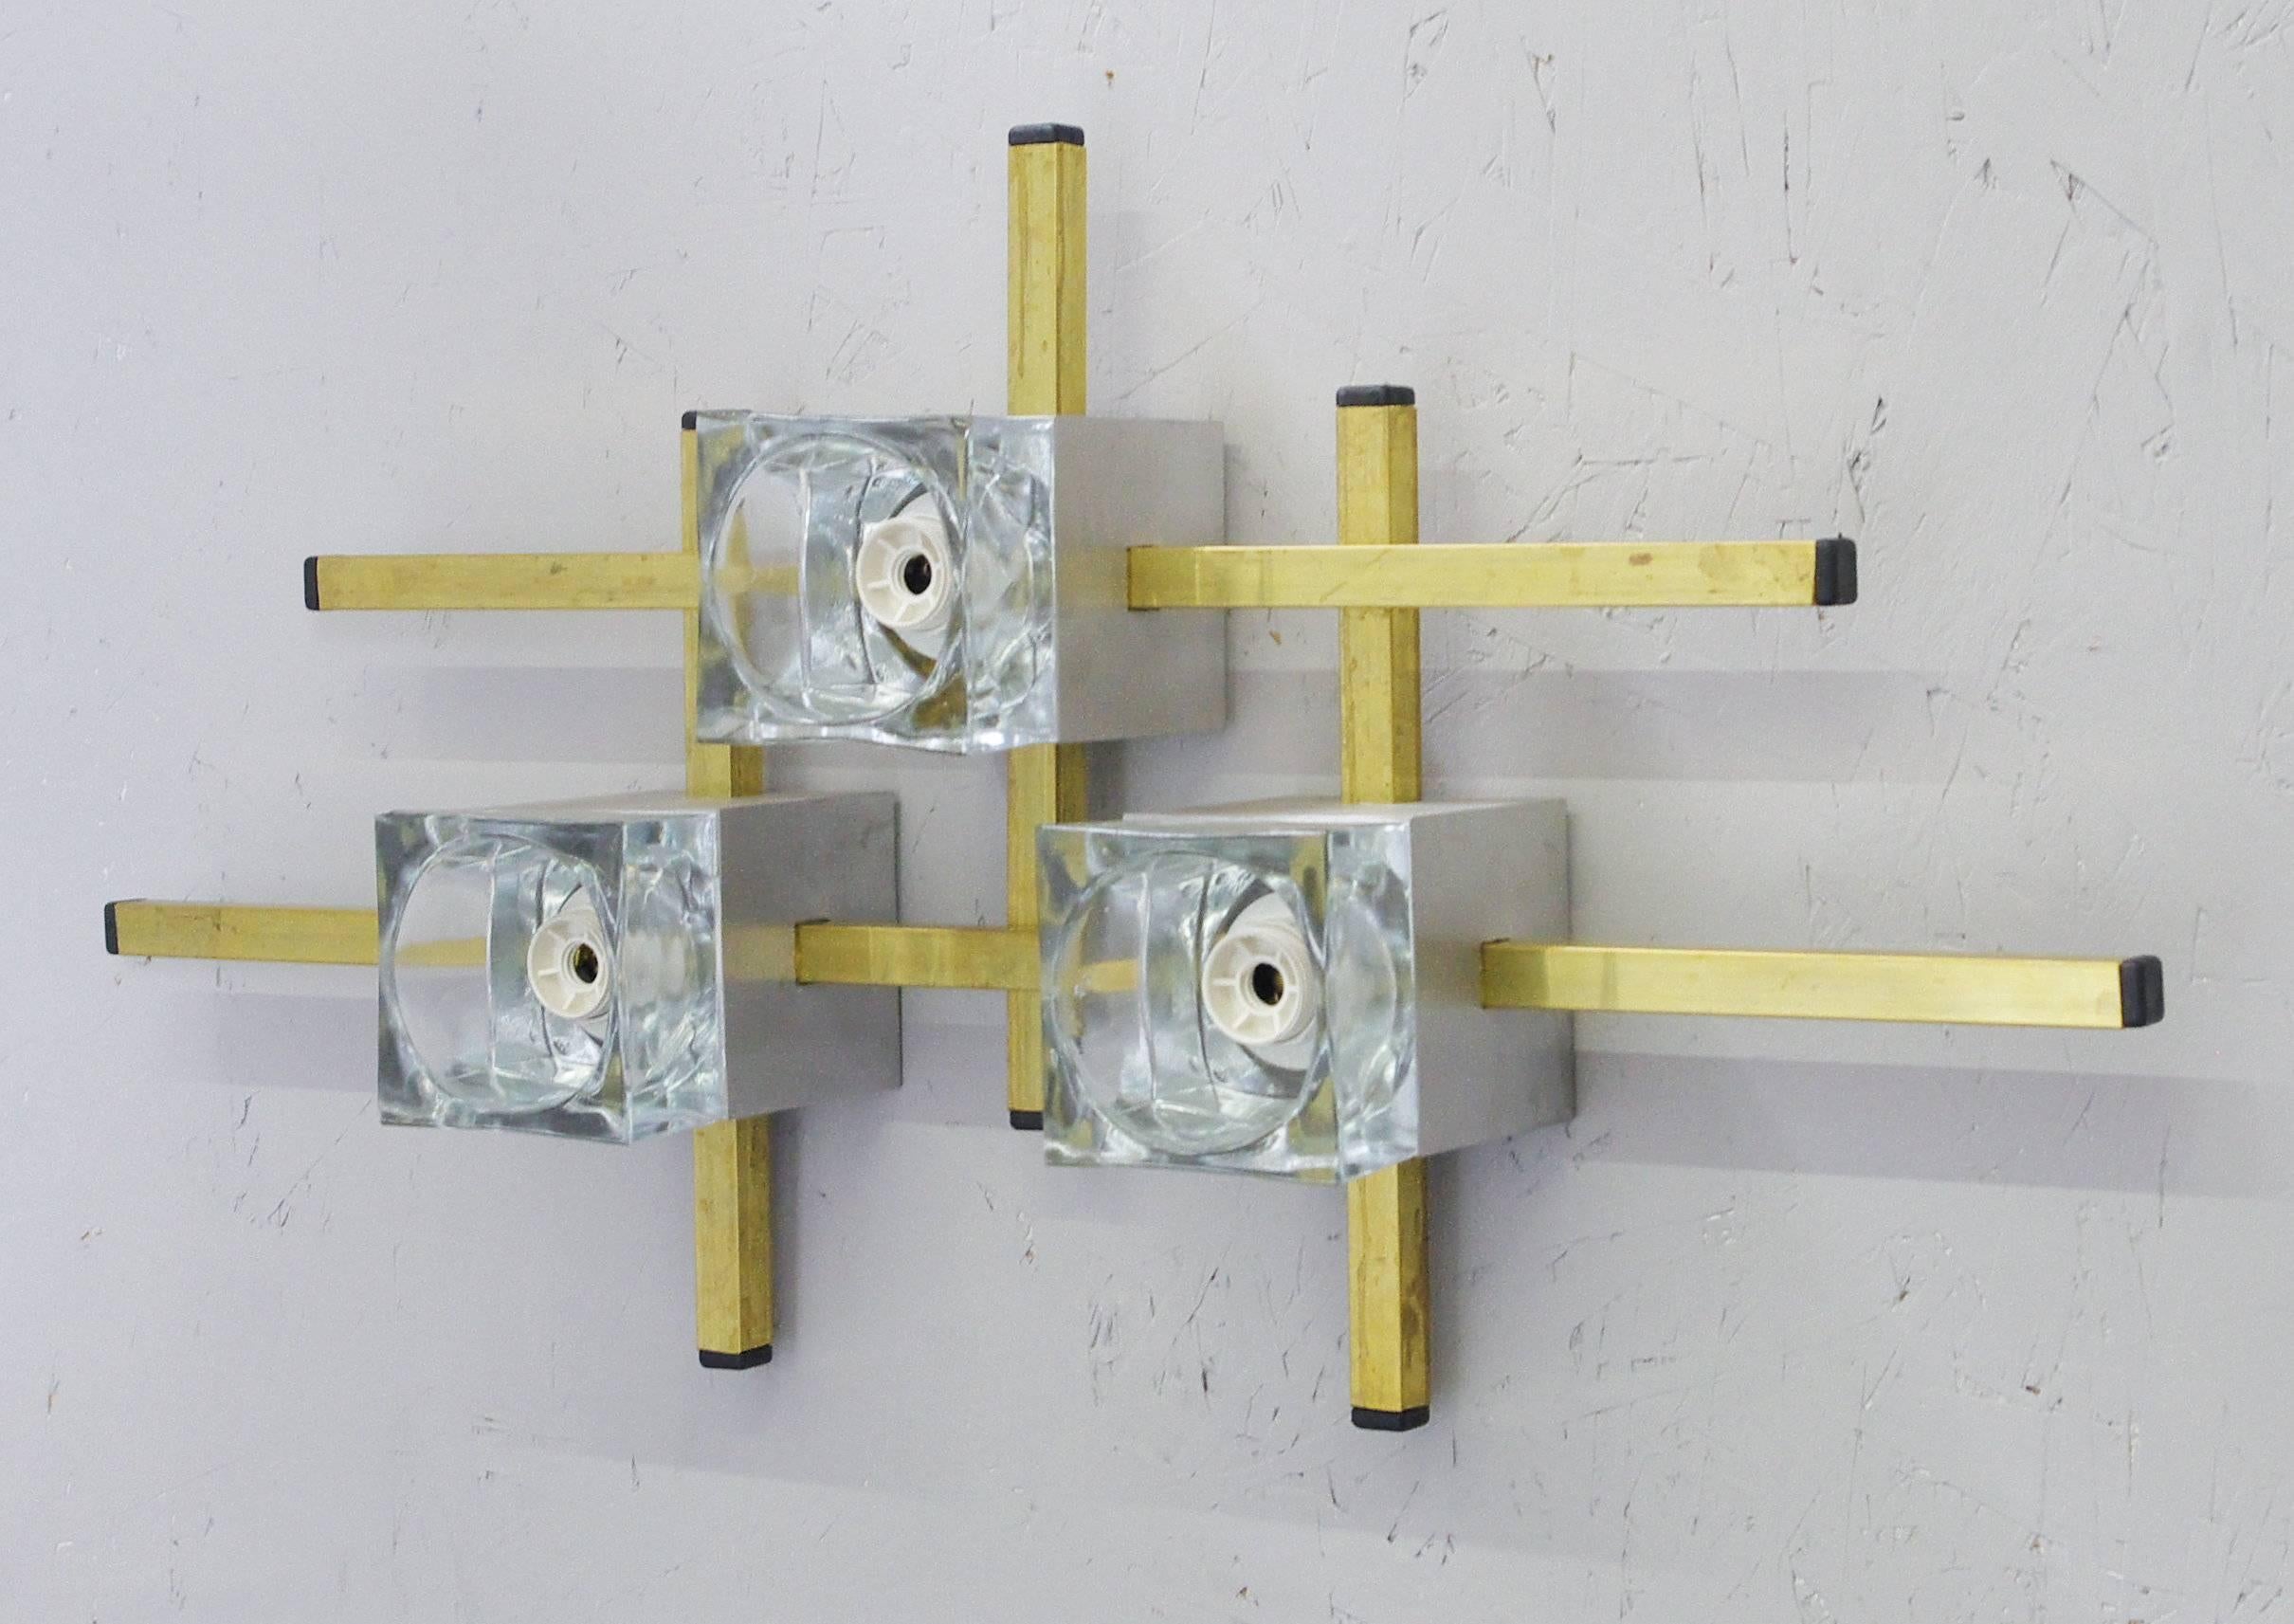 Pair of geometric sconces by Gaetano Sciolari with three glass cube lights.
Brass and aluminum hardware
3 candelabra type light sockets / wired for the US
2 pairs available